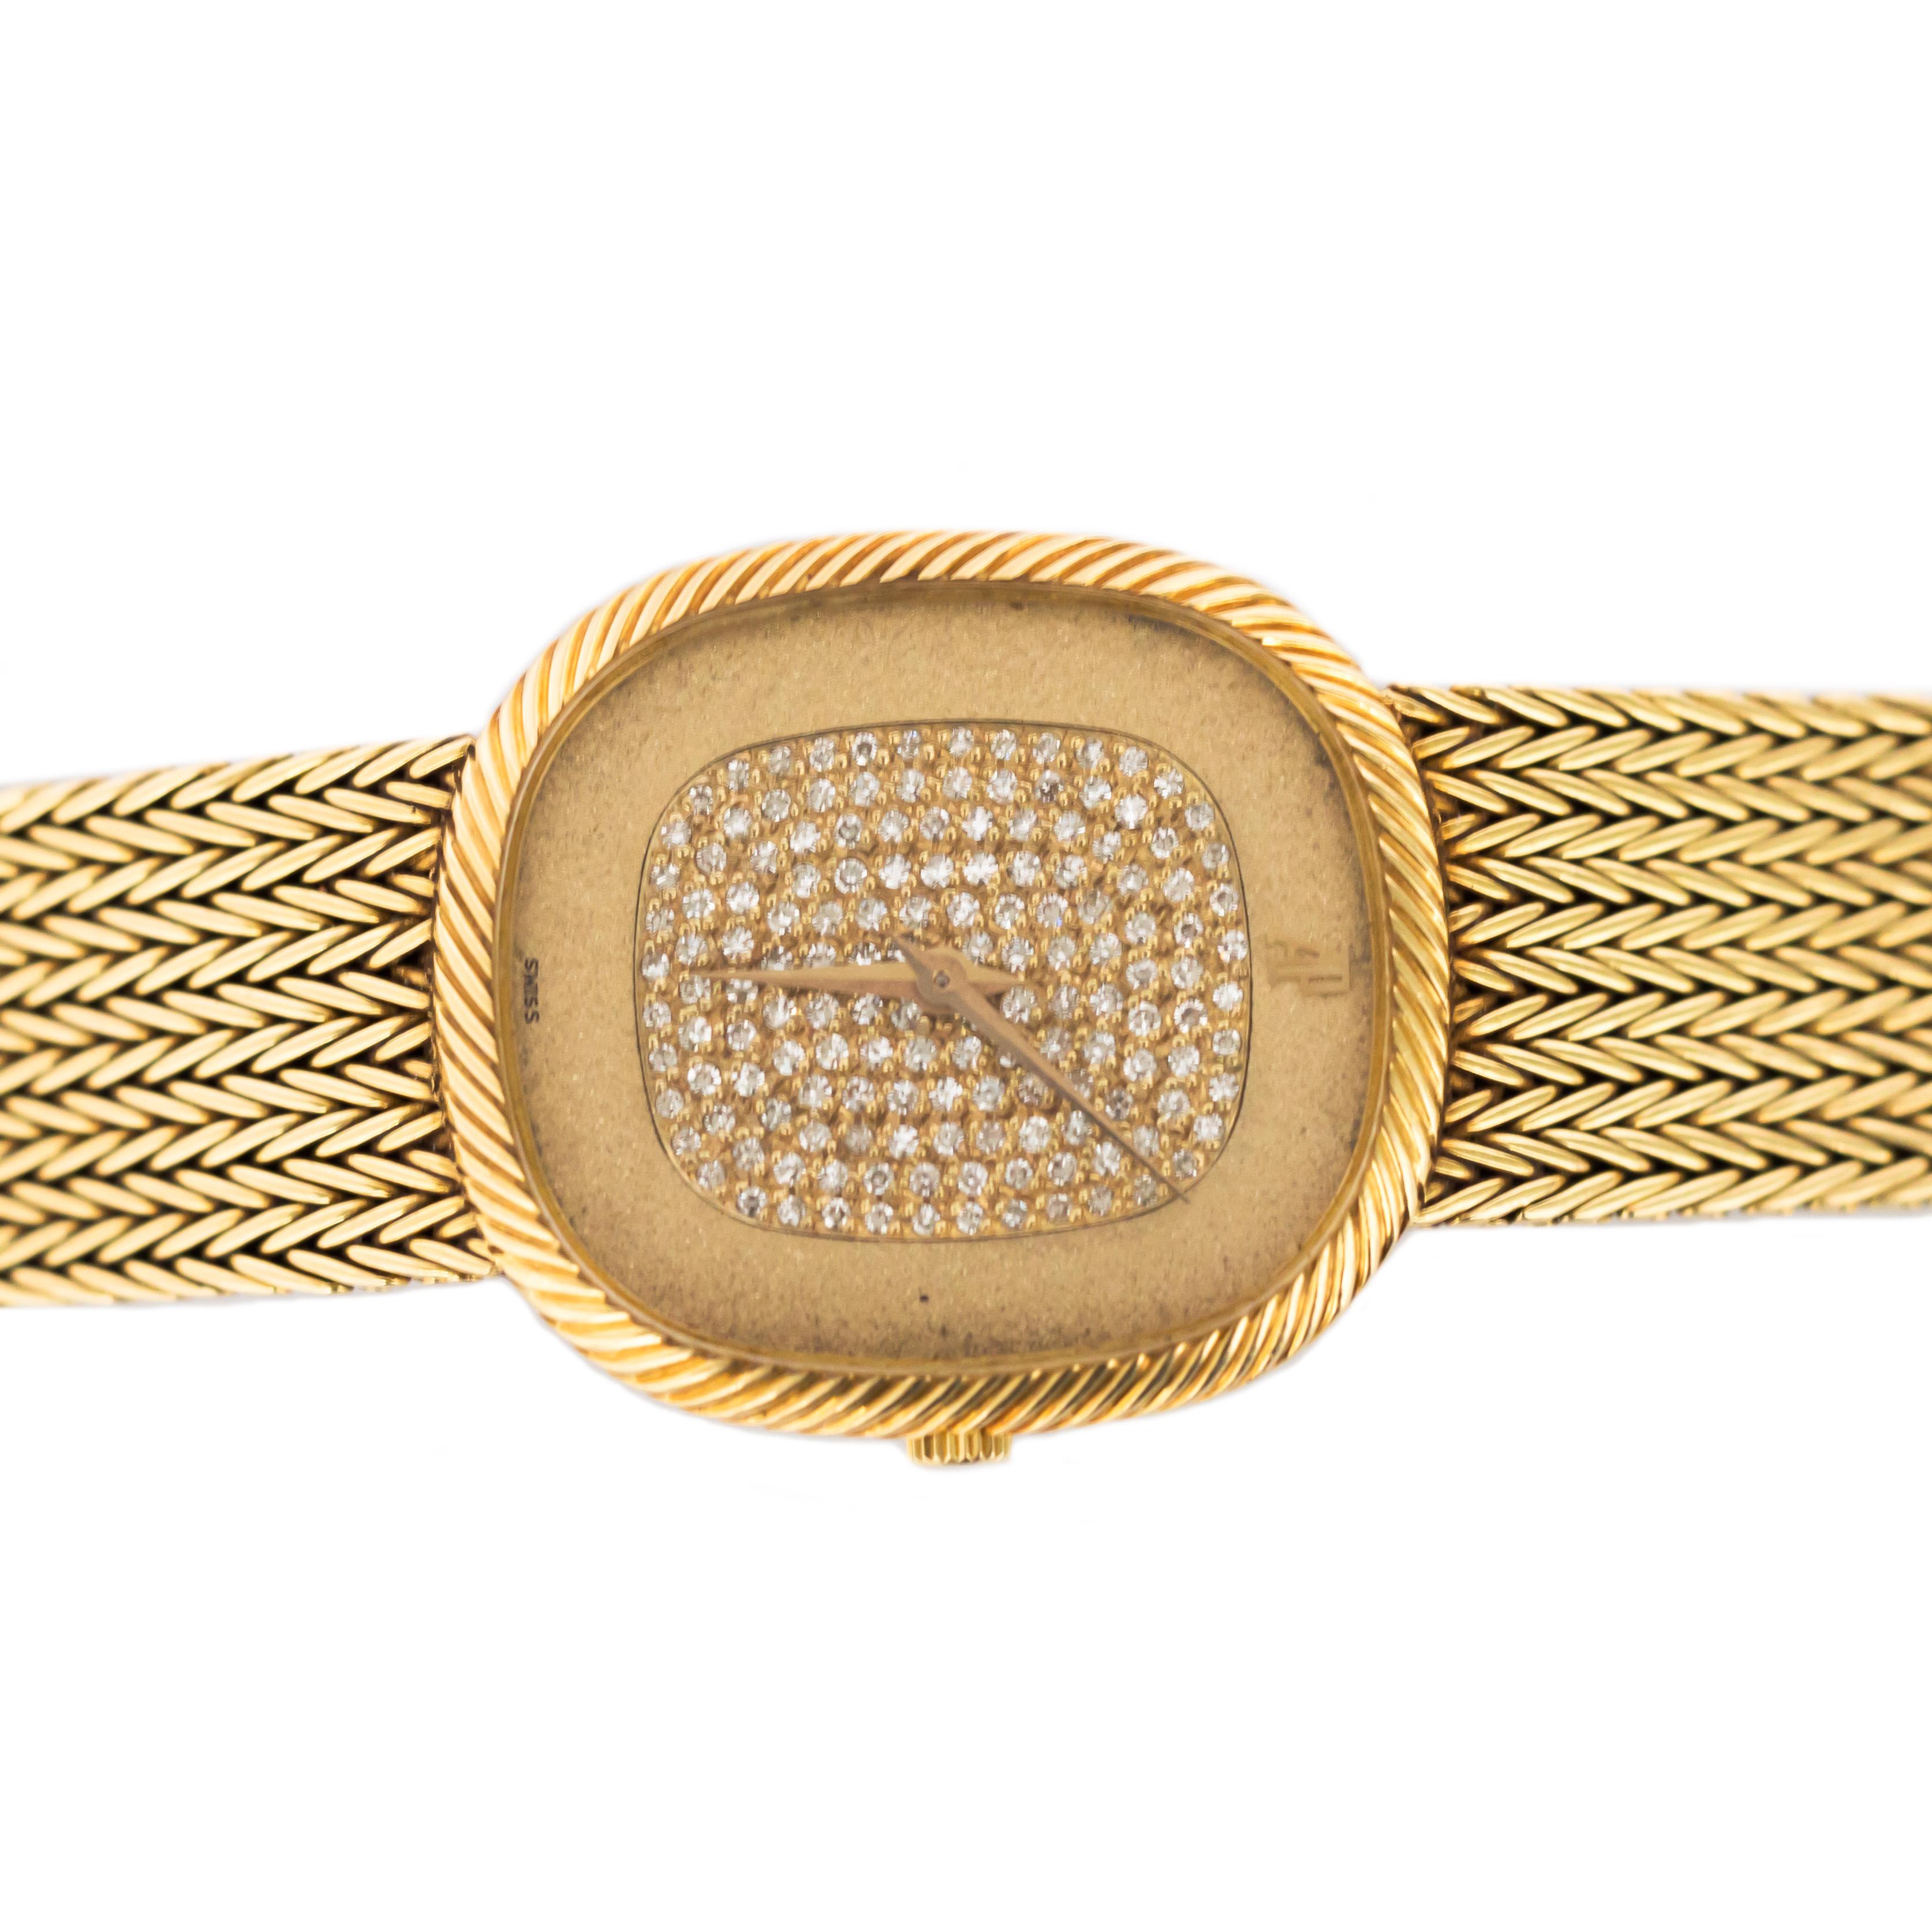 Audemars Piguet Diamond and Gold Watch 
Metal: 18 Karat Yellow Gold 
Weight: 79.8 grams 
Length: 7.45 inches 

Stones Detail:
Shape: Round Brilliant 
Total Carat Weight: .50 carat, total weight
Color: E-F
Clarity: VS1
